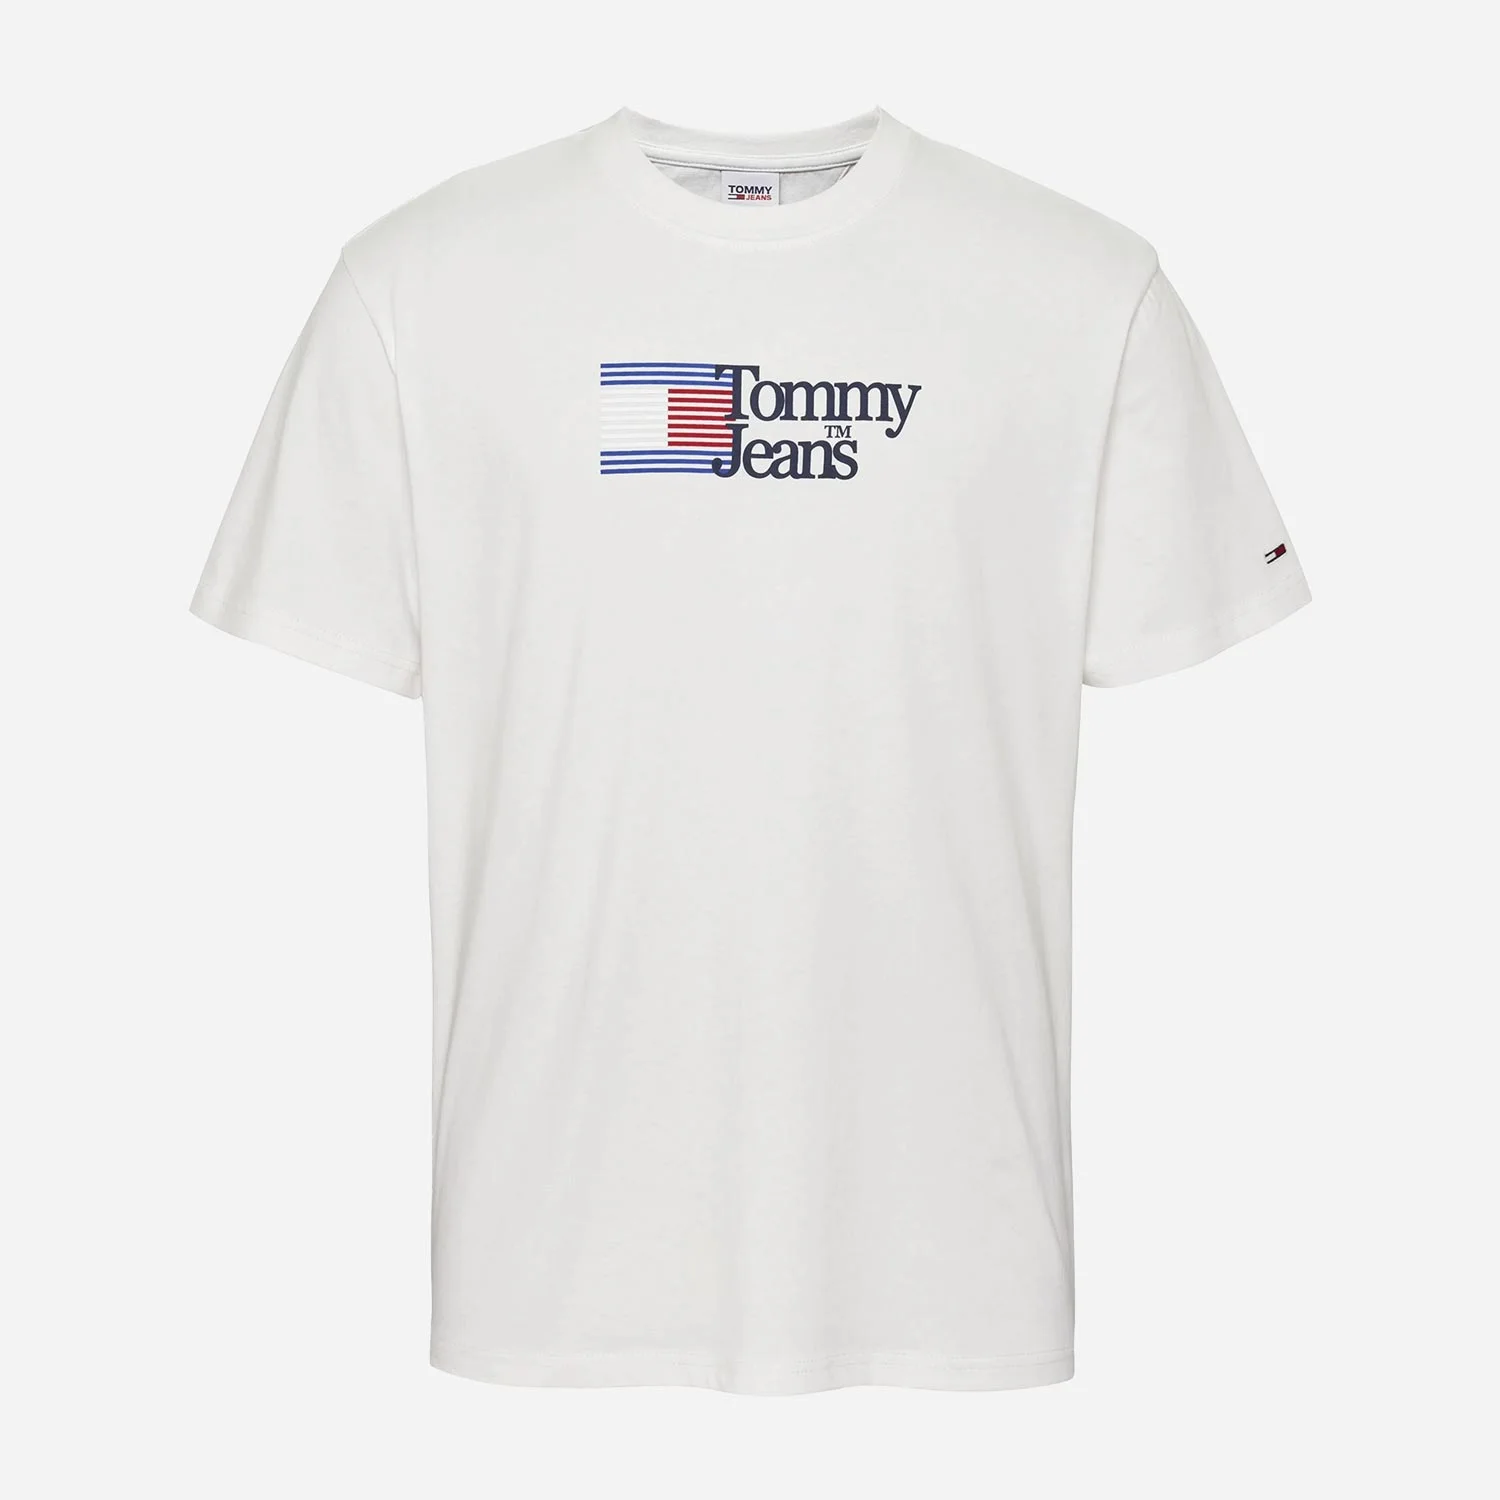 Tommy Jeans | Store The Cream